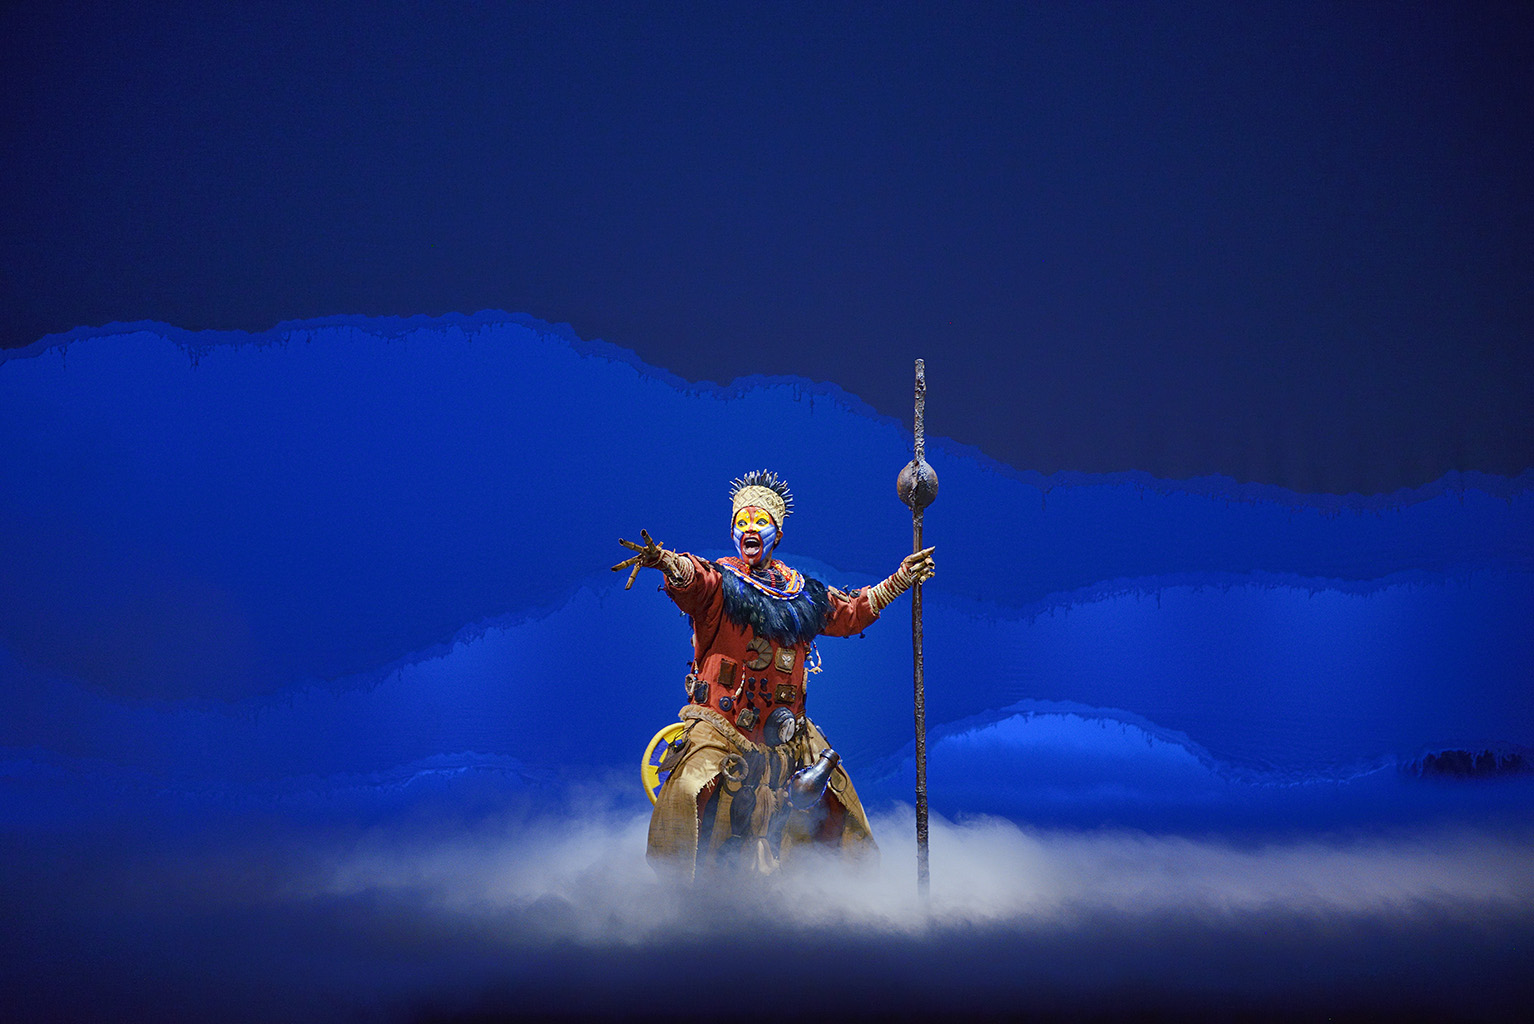 The Lion King, Disney Theatrical Productions, 2012 Bristol UK